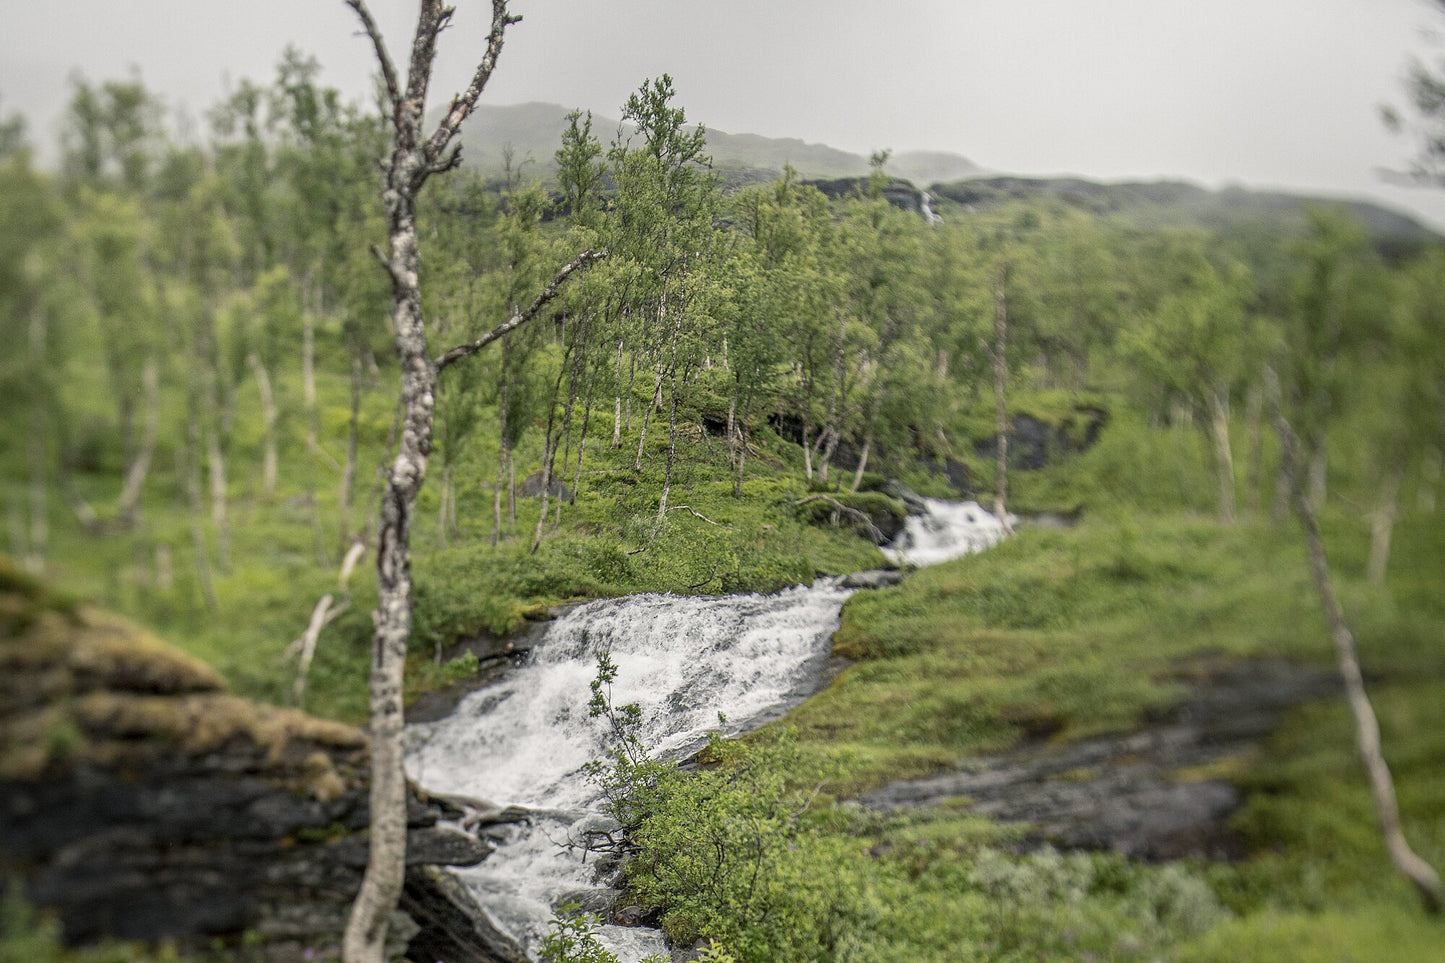 River winding through Norwegian mountains under cloudy sky, surrounded by mountain birches.